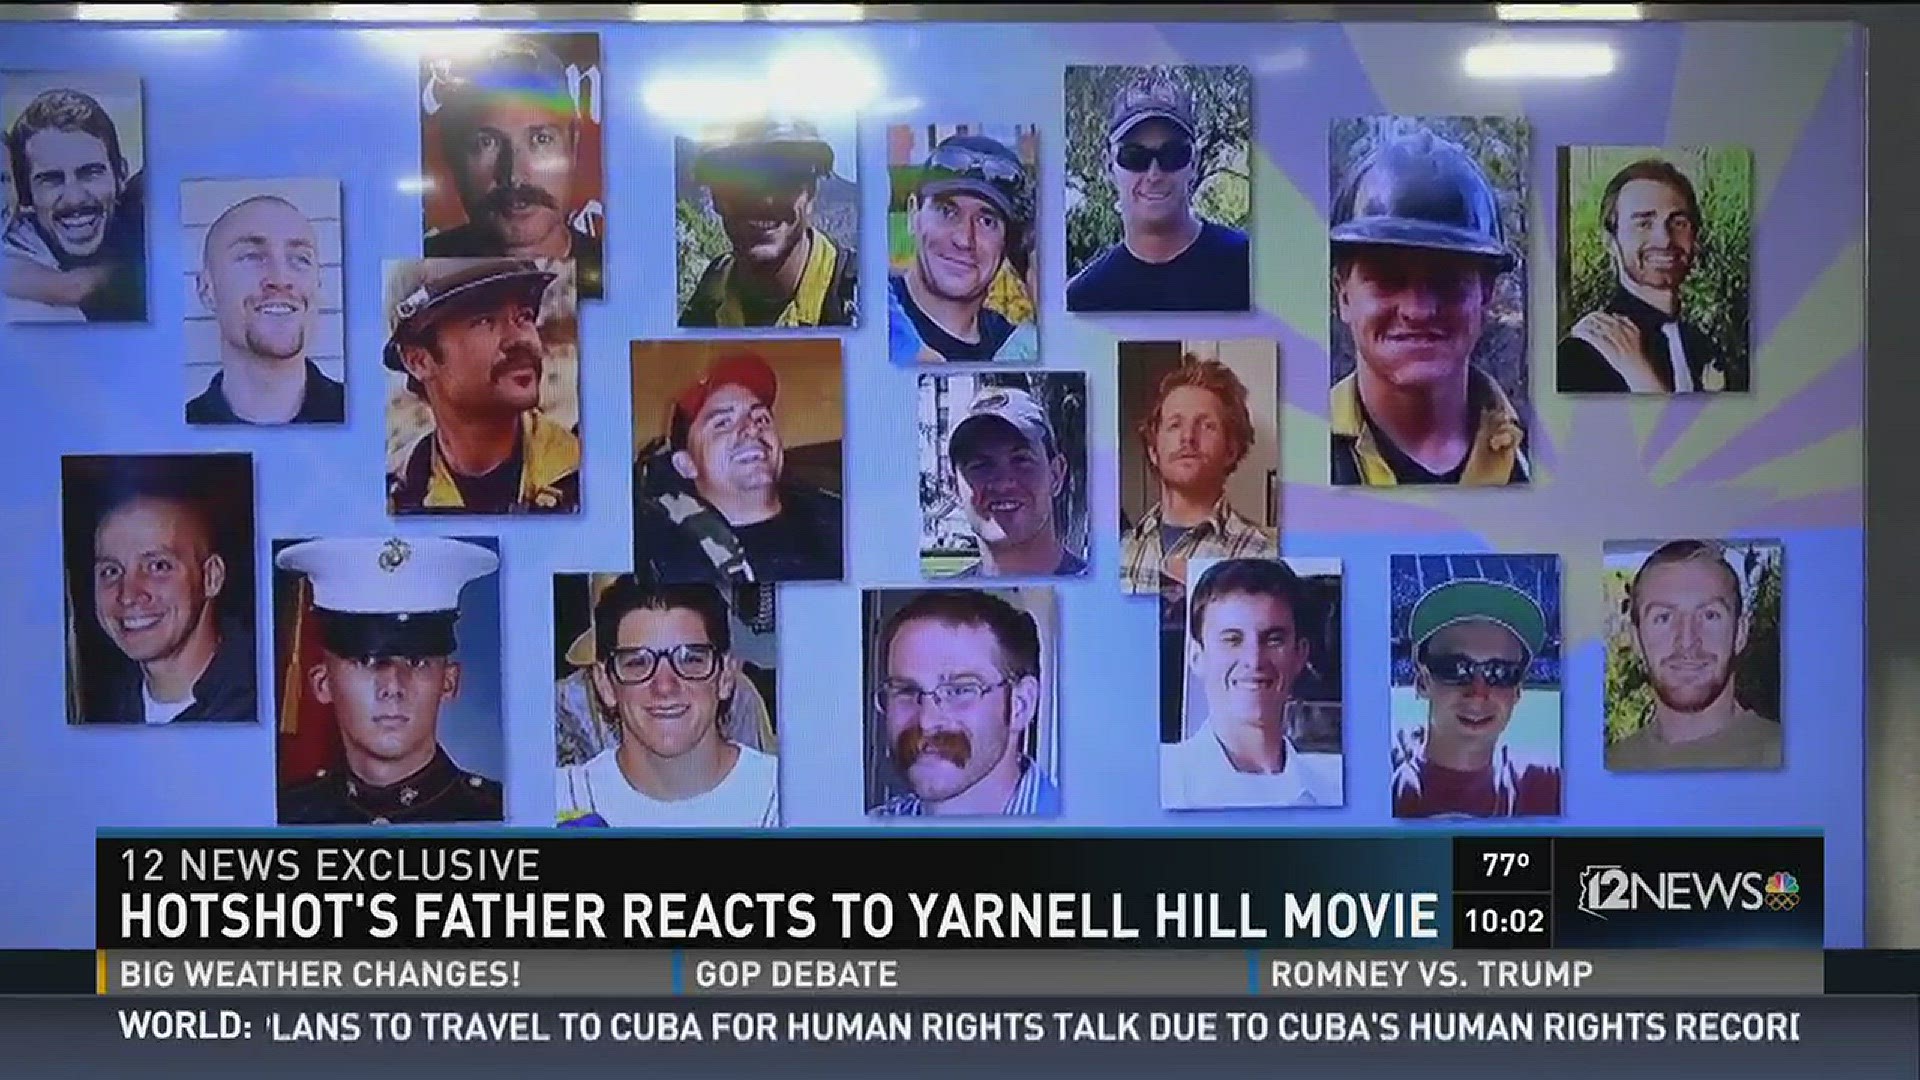 Hotshot's father reacts to Yarnell Hill movie.